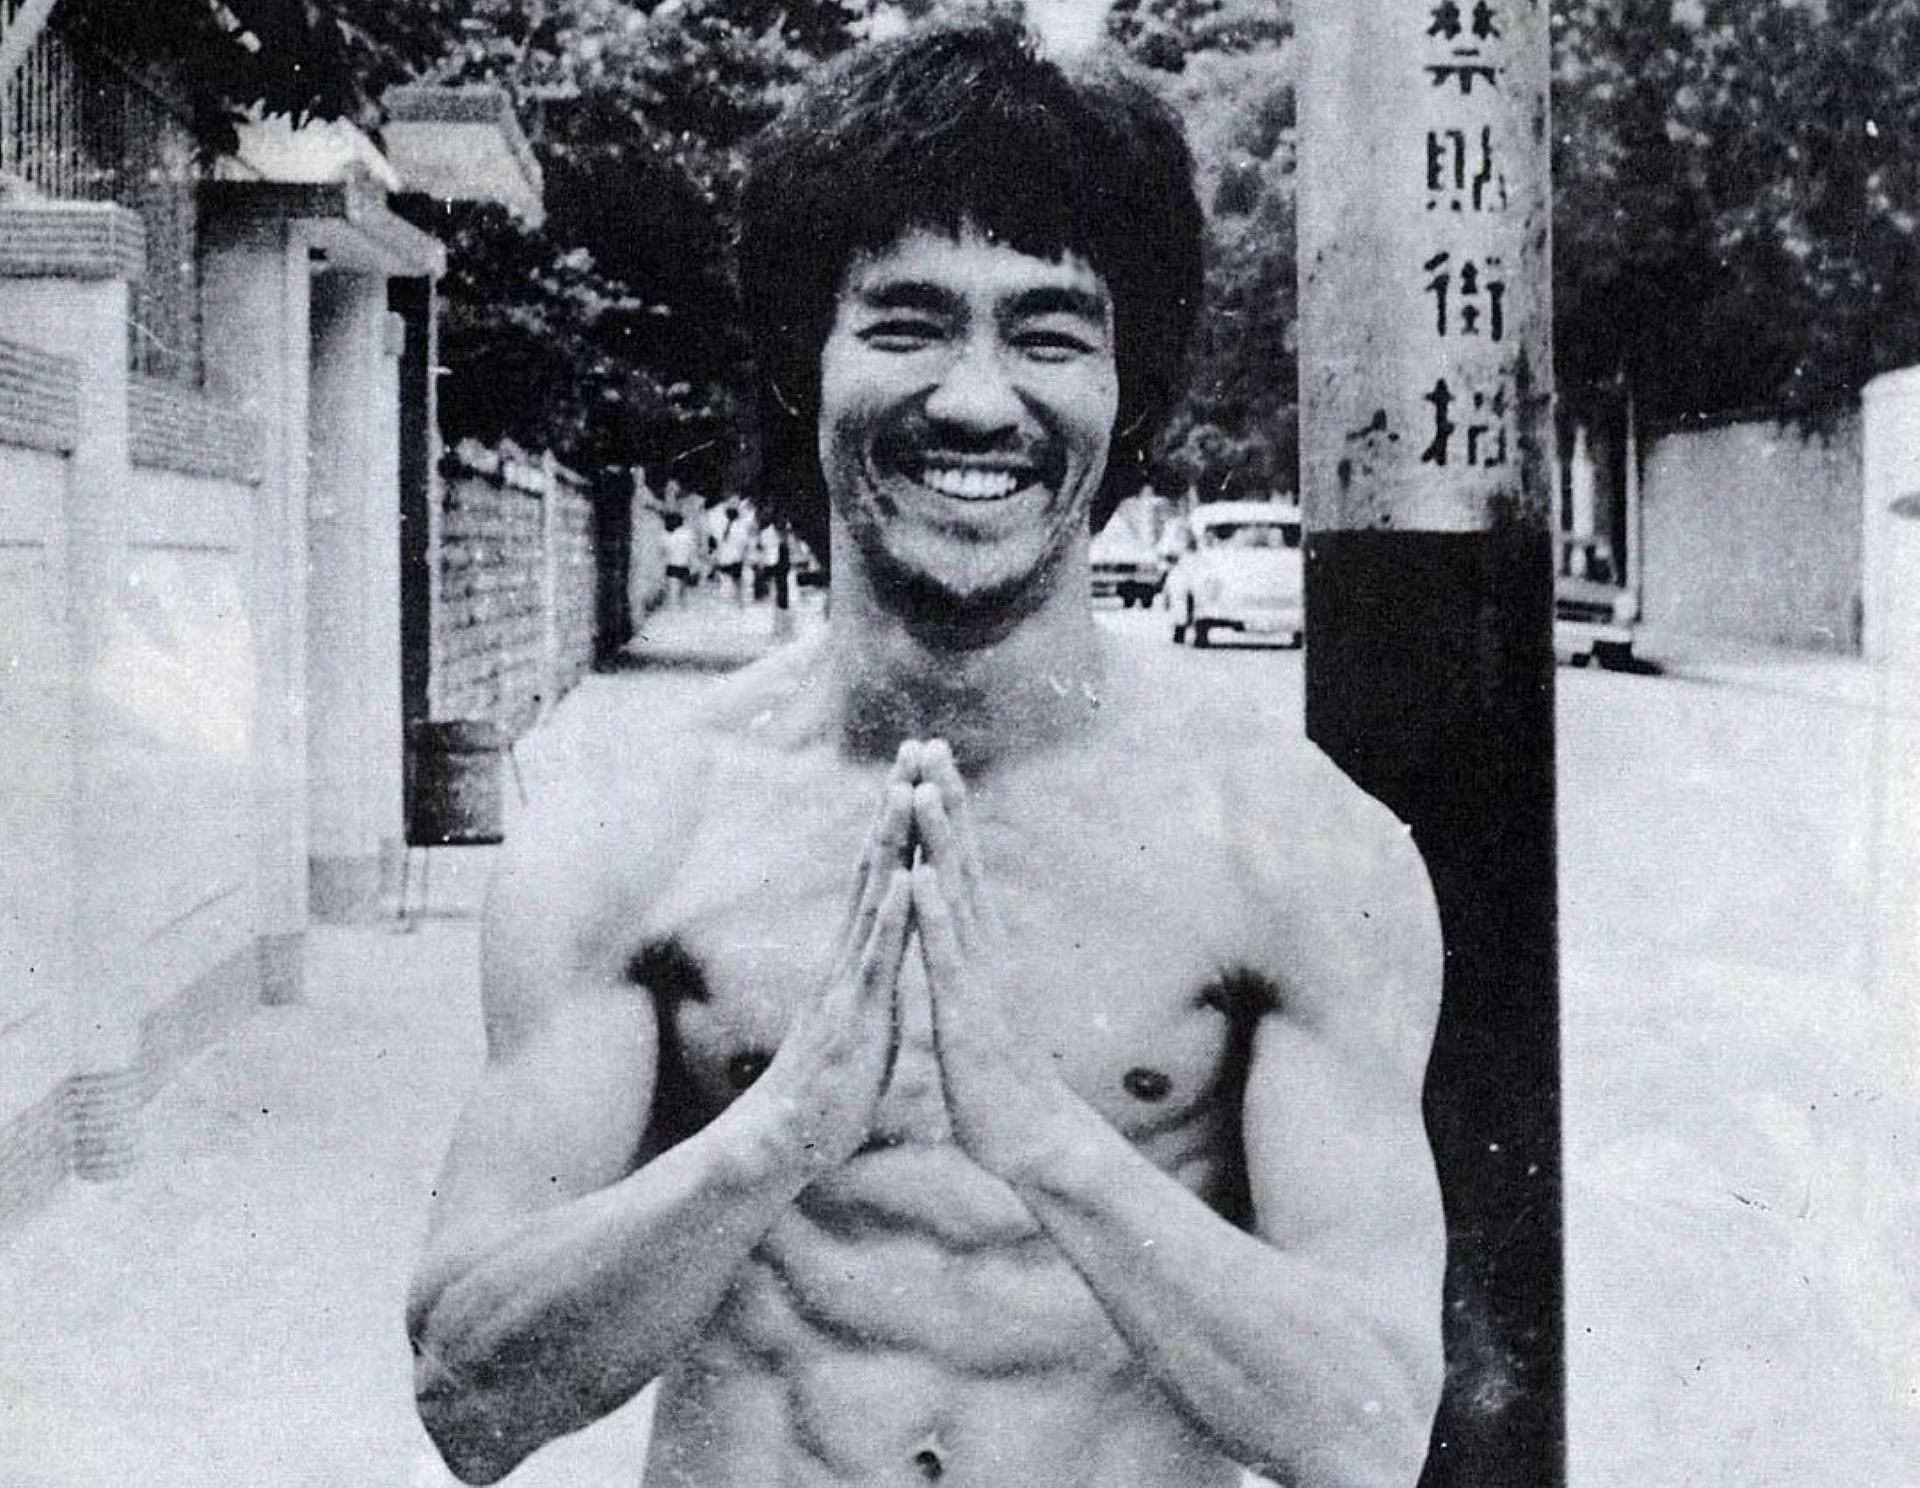 Everyone is curious about what Bruce Lee